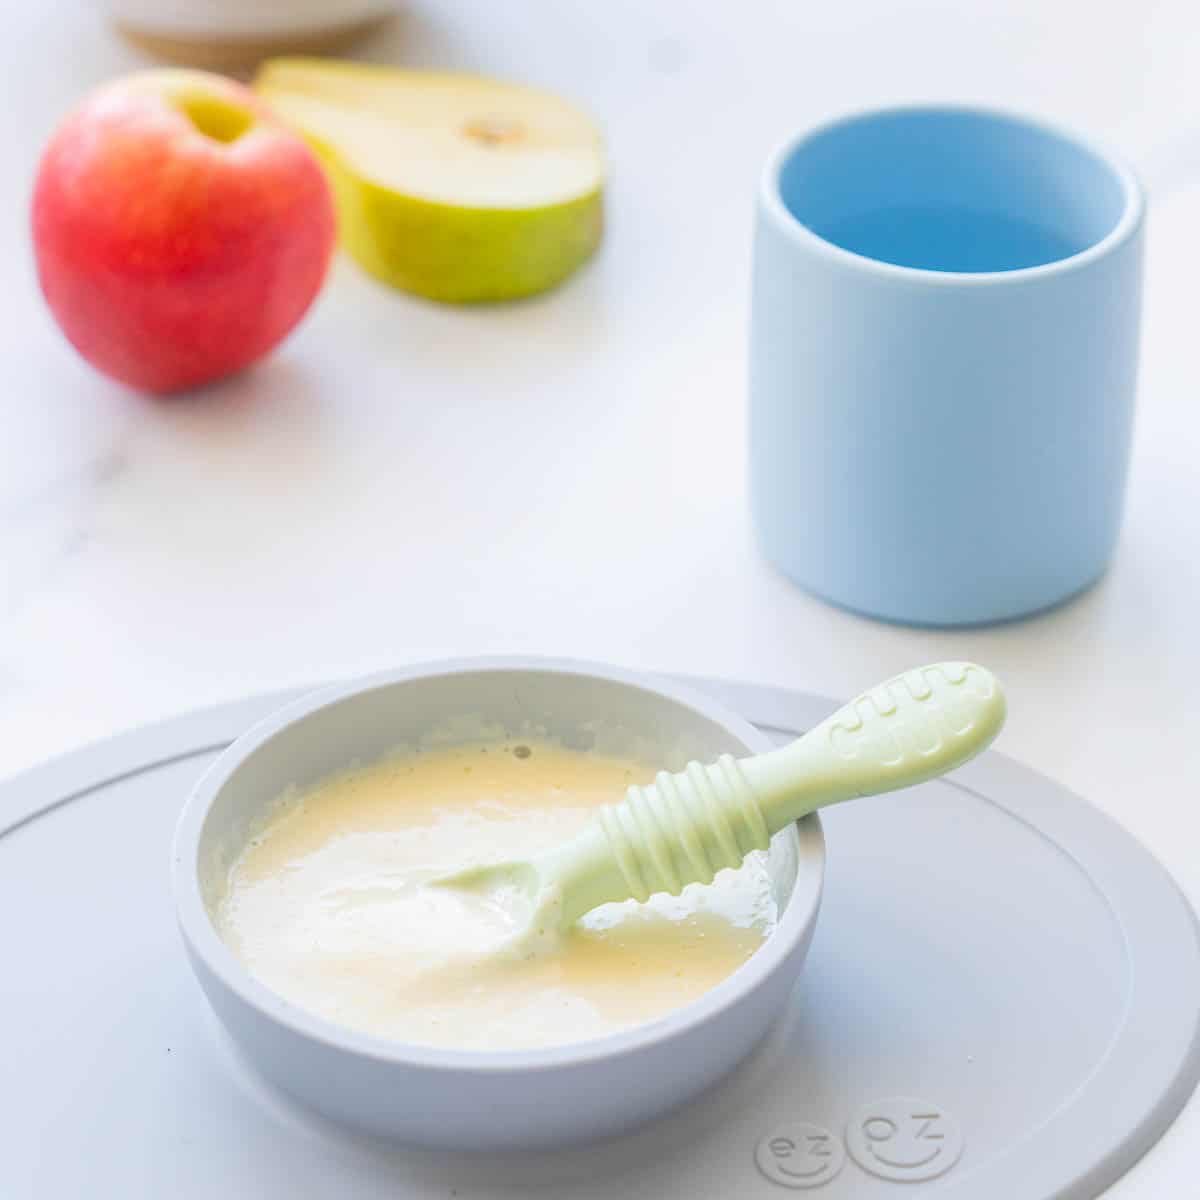 A grey silicone baby plate of baby custard with a green spoon, blue baby cup and fruit in the background.